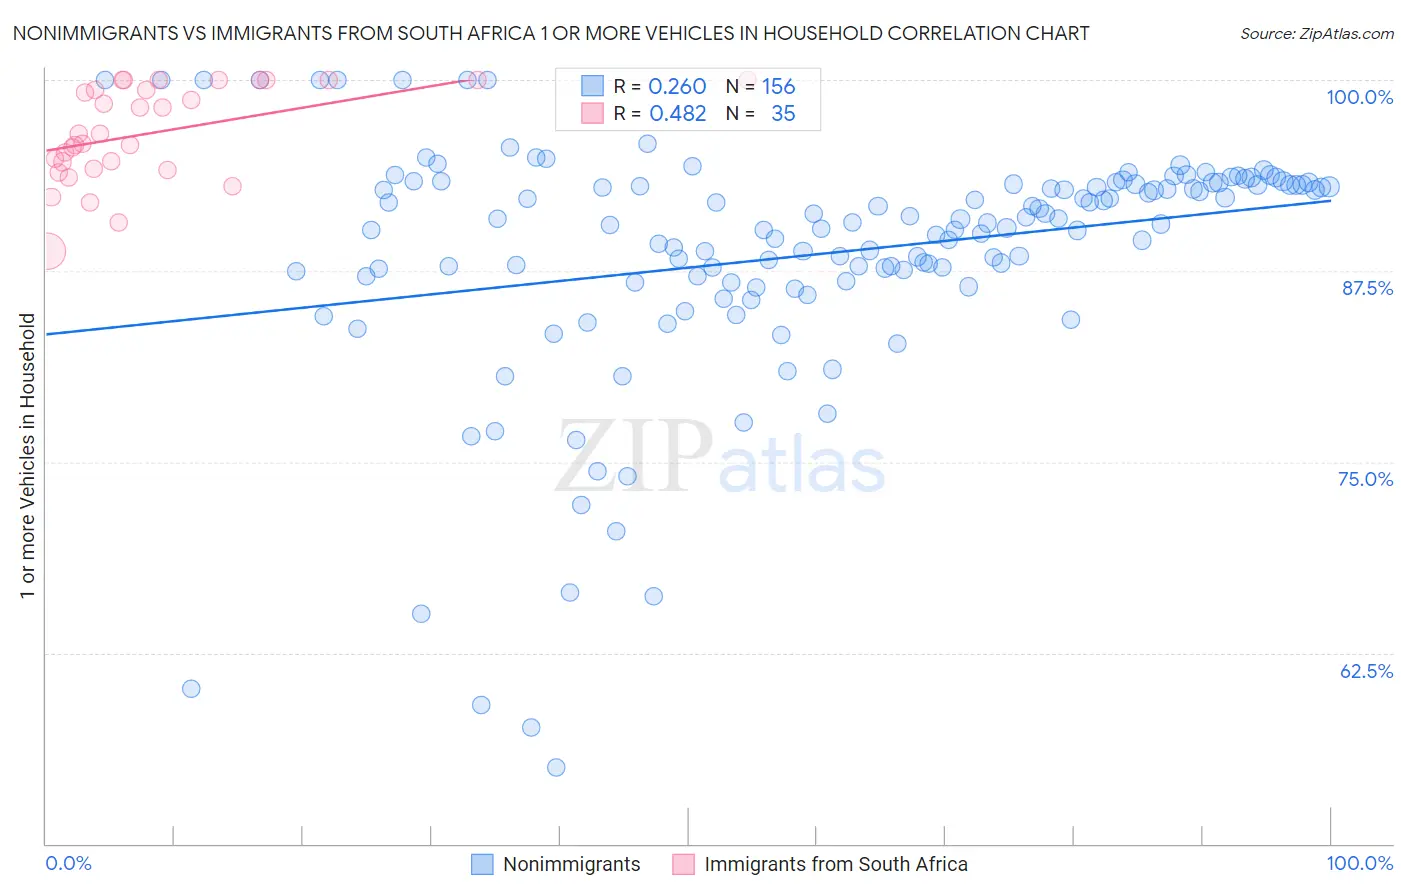 Nonimmigrants vs Immigrants from South Africa 1 or more Vehicles in Household